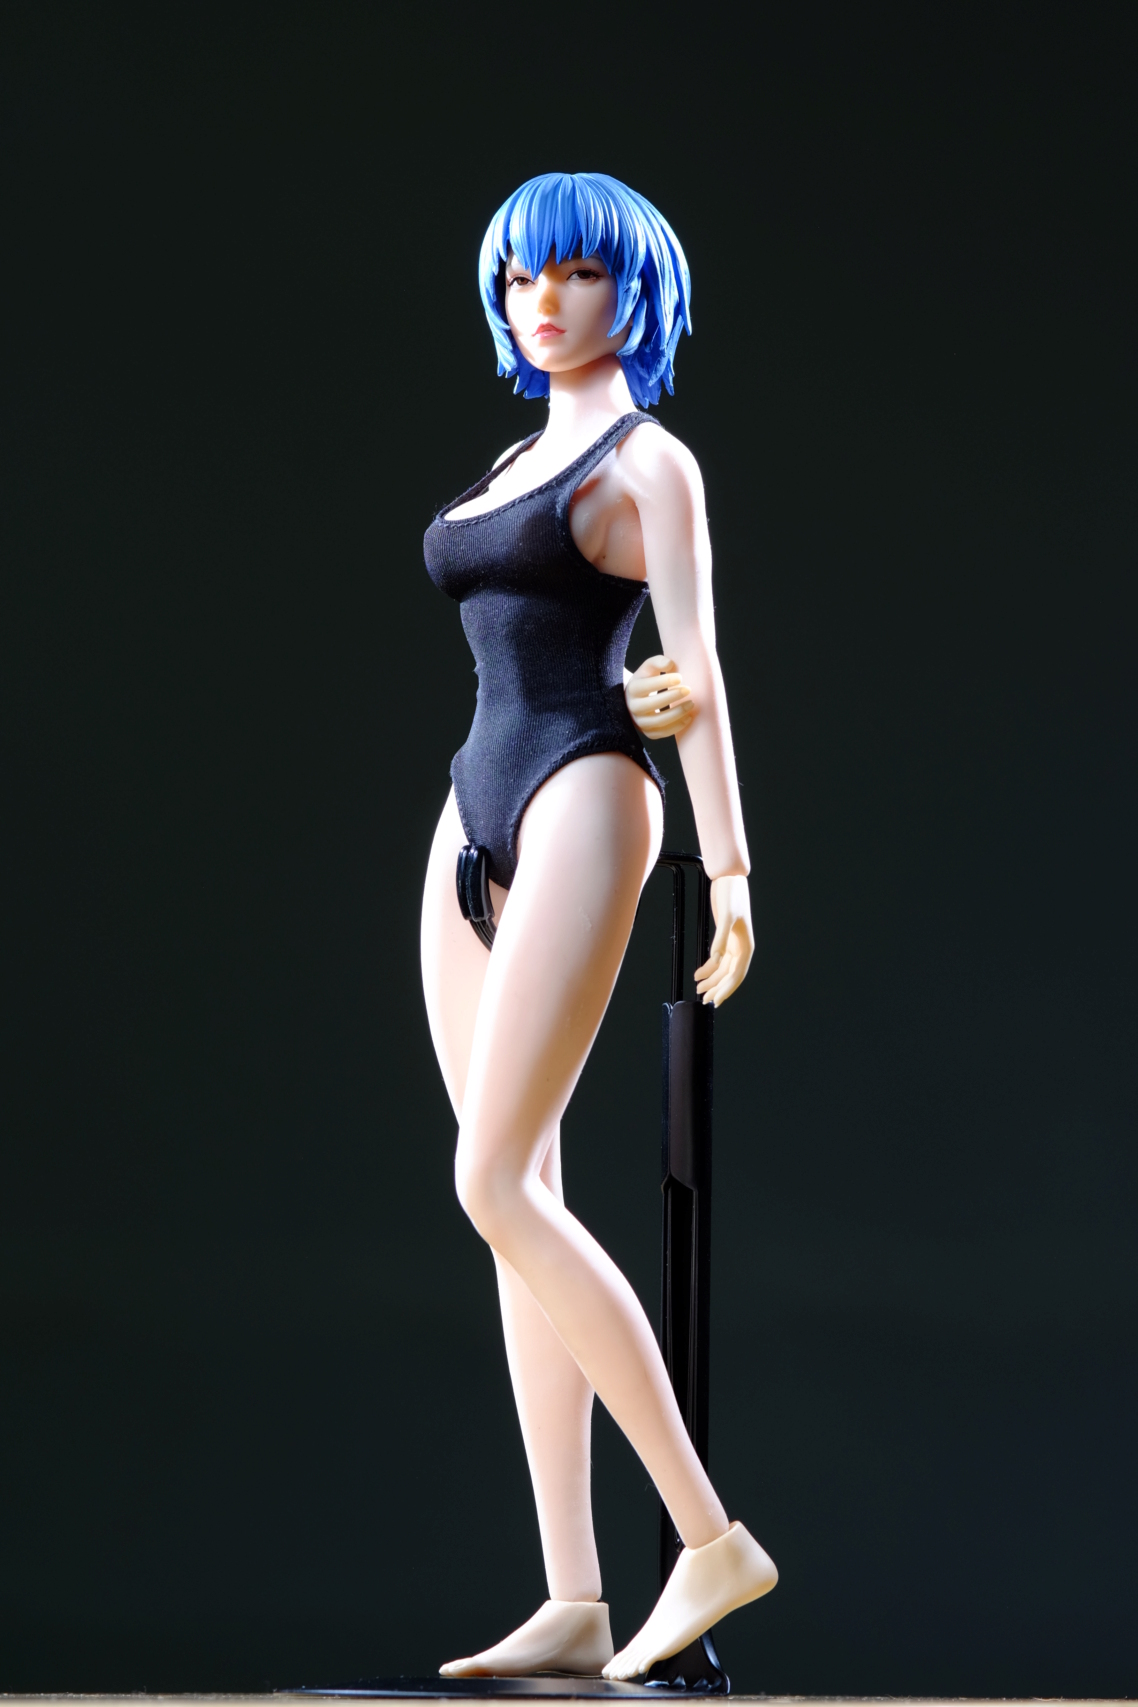 Clothing - NEW PRODUCT: VSToys: 1/6 Ayanami Rei student outfit & head sculpt set Fuji0911